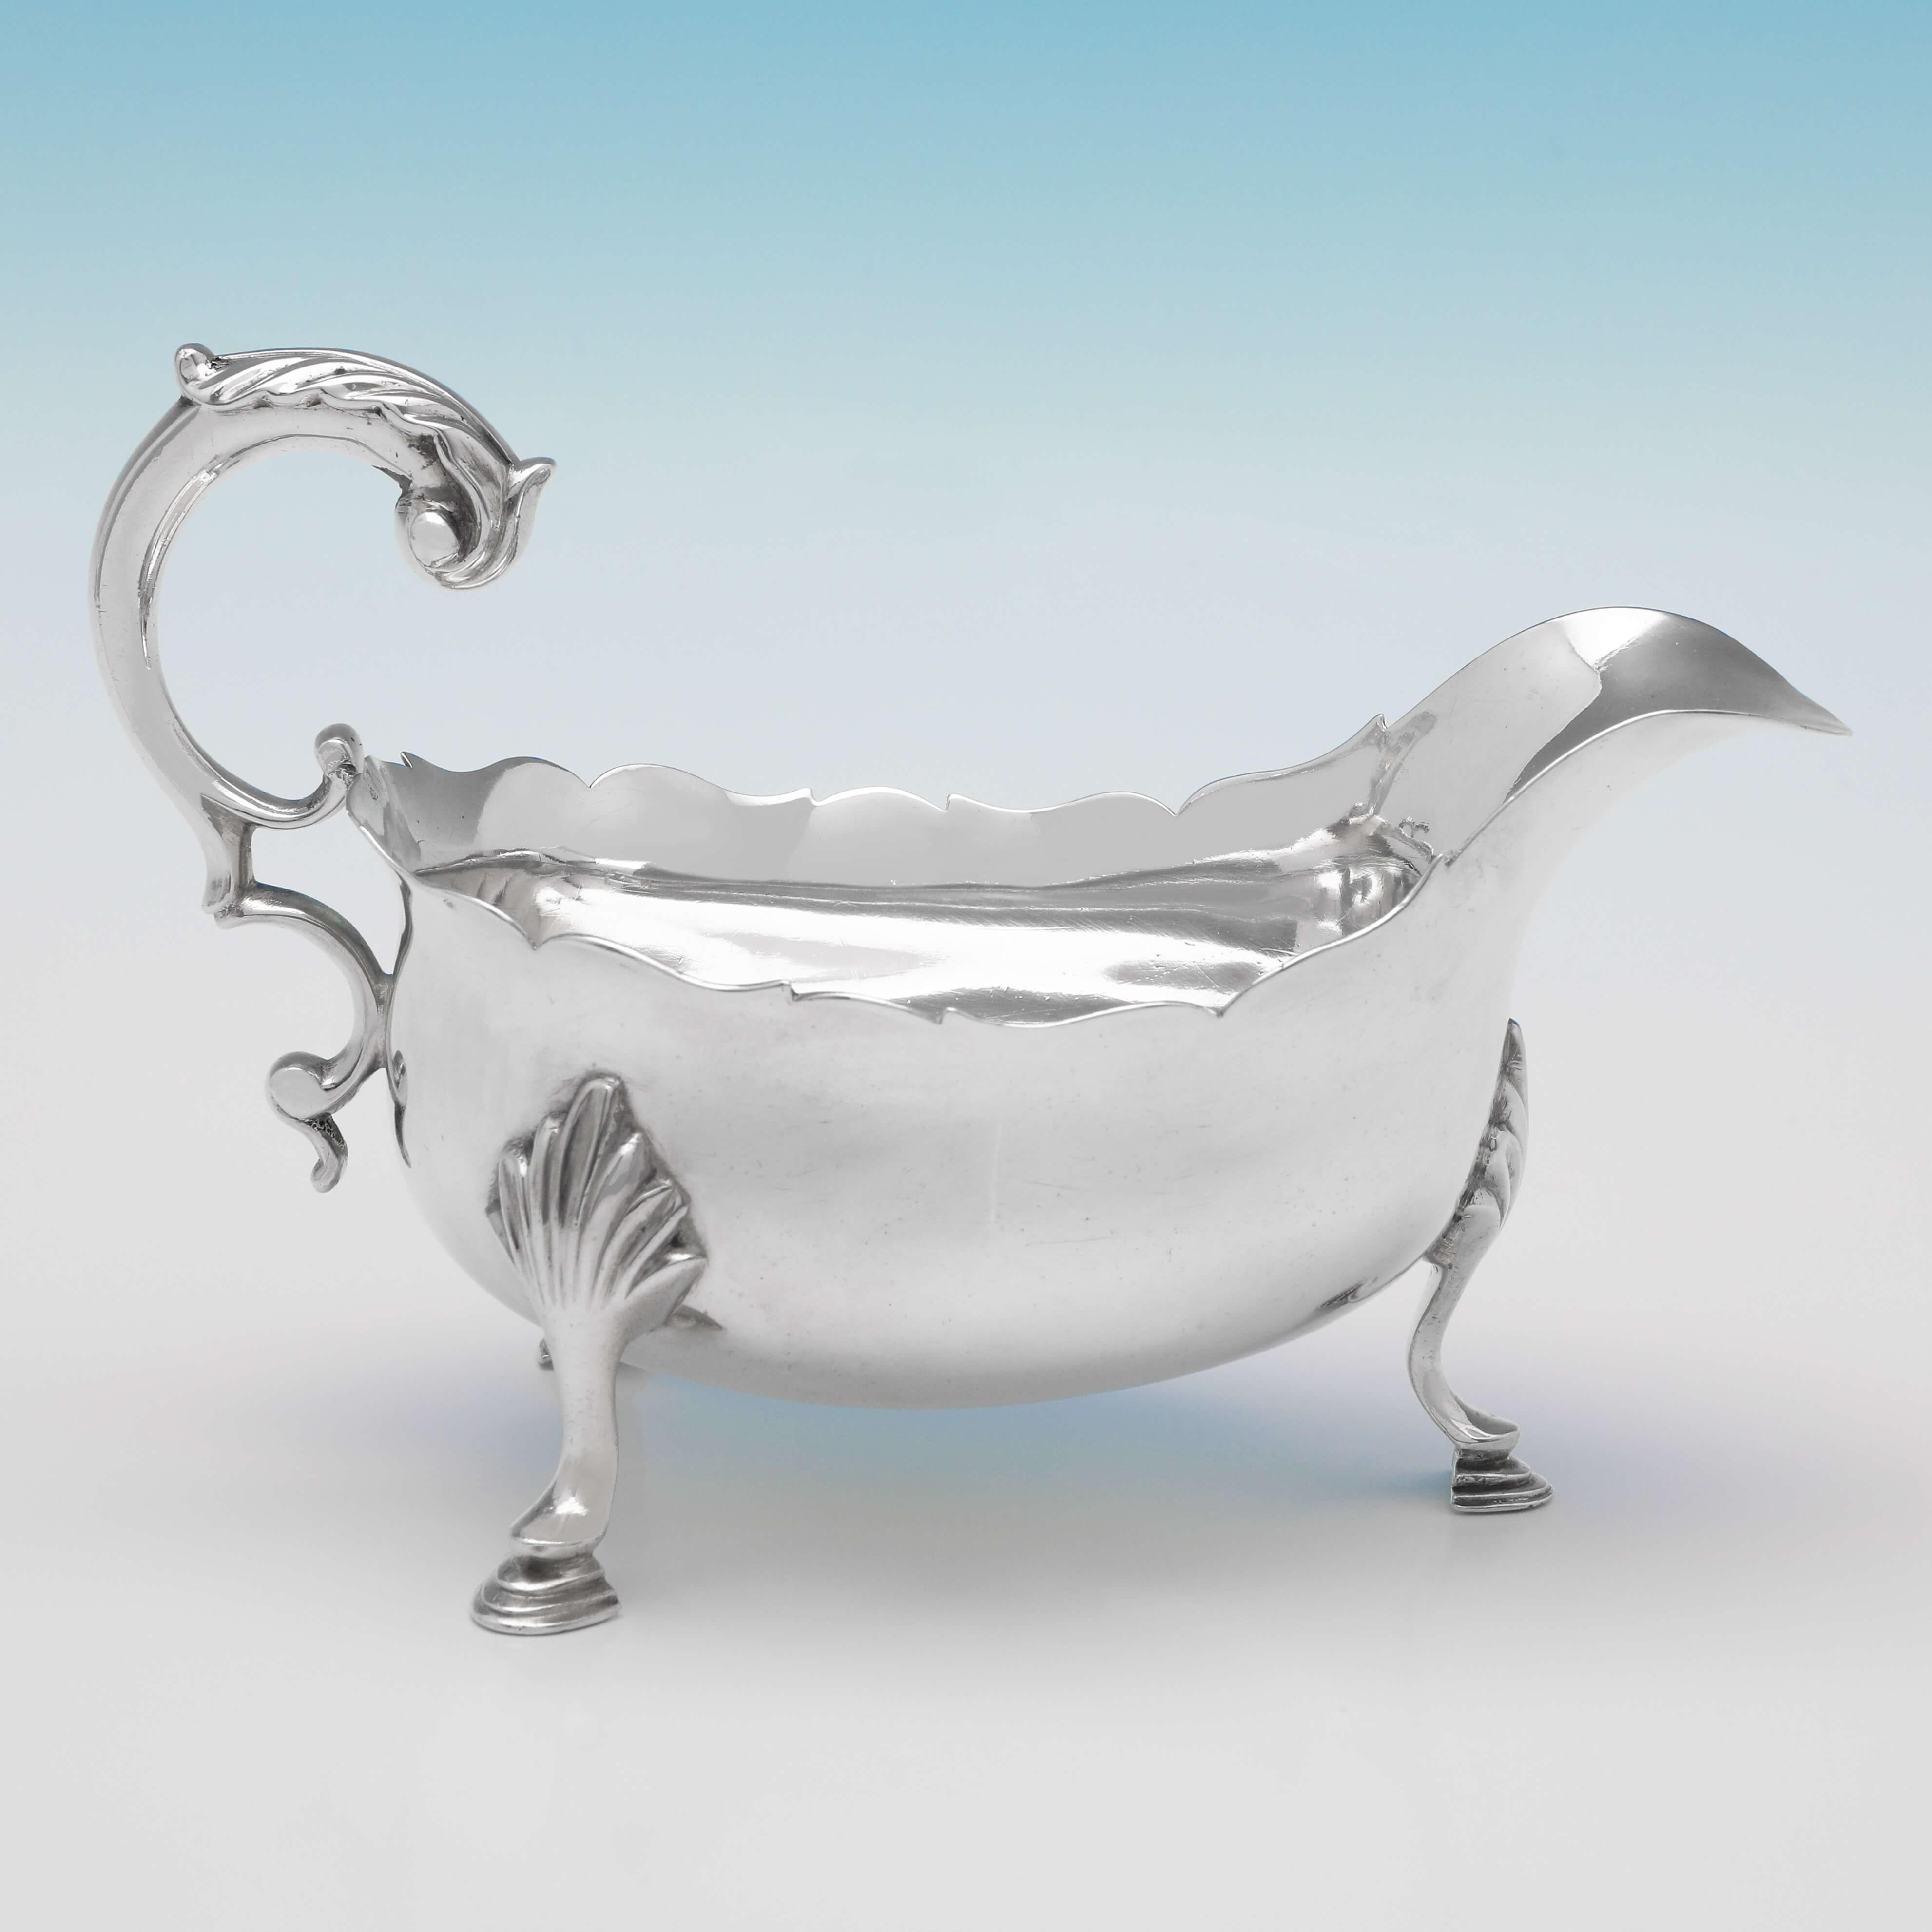 Hallmarked in London in 1781, this handsome, George III, Antique Sterling Silver Sauce Boat, features a shaped border, an acanthus detailed flying scroll handle, and stands on three hoof feet. The sauce boat measures 4.25